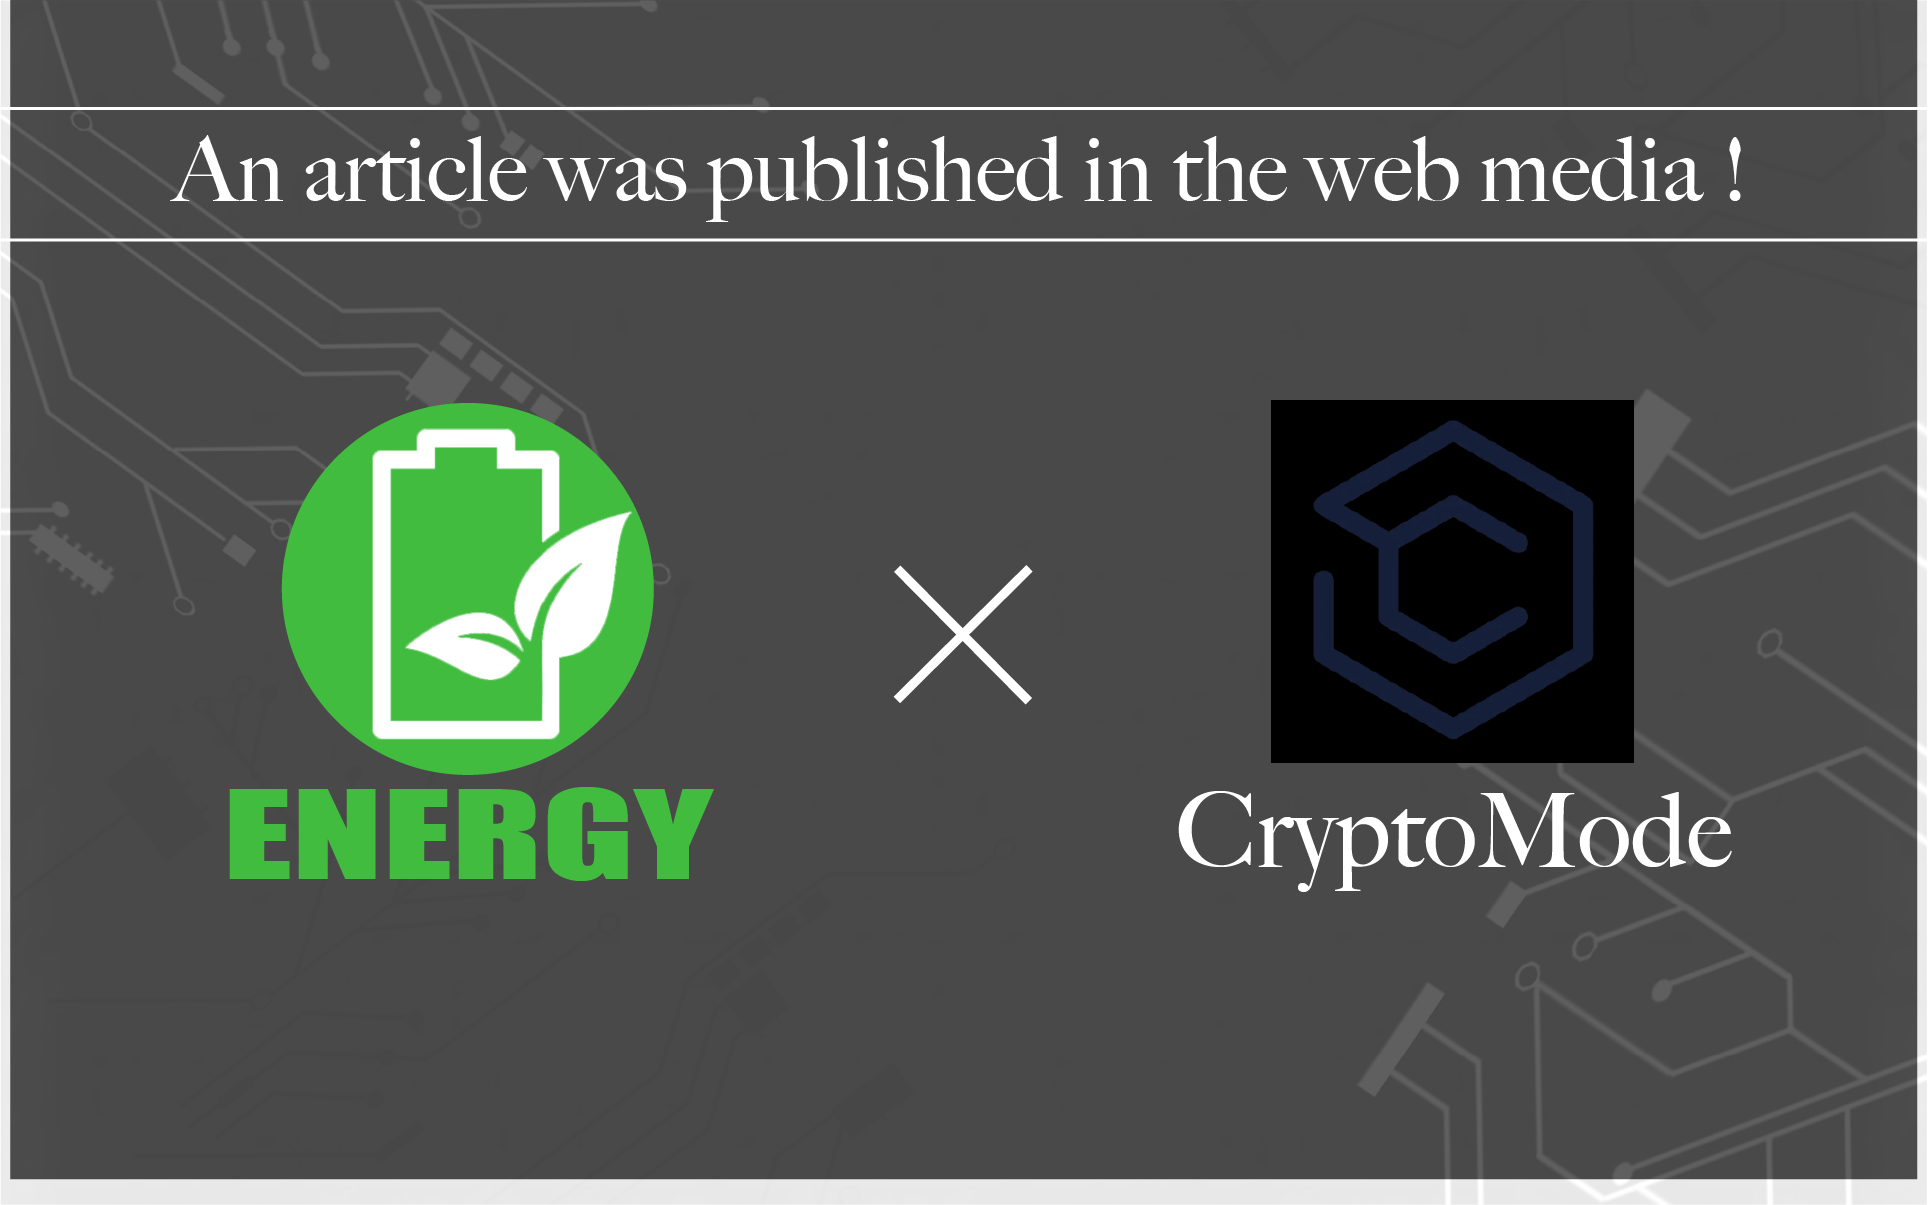 Published in the CryptoMode